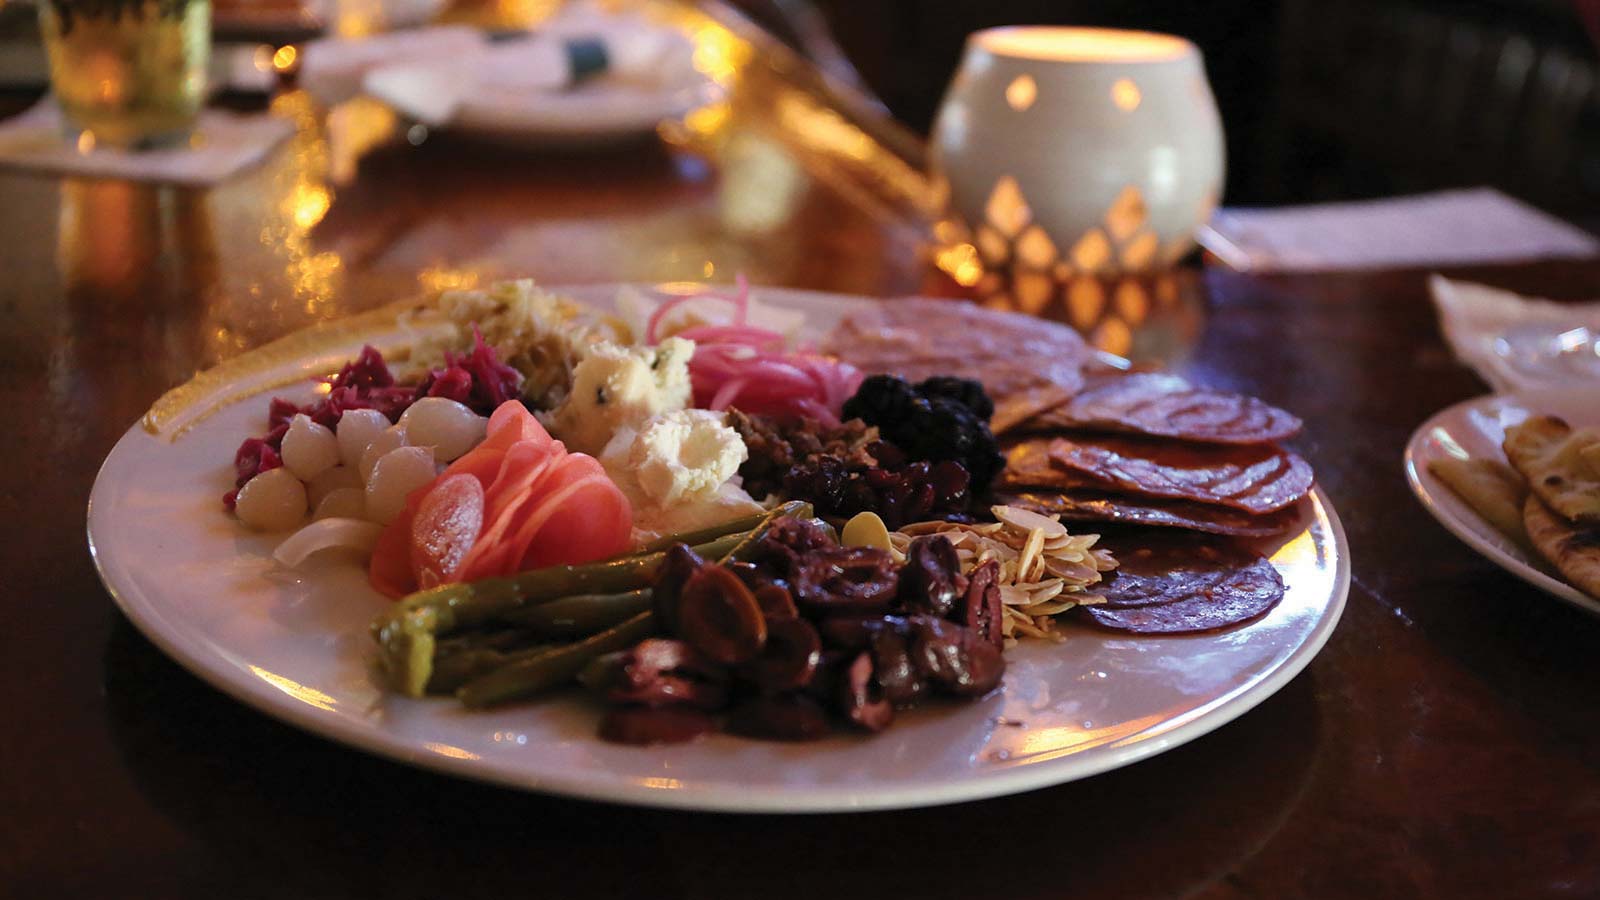 Find restaurants close to Oneida County’s winter trails | Food on display